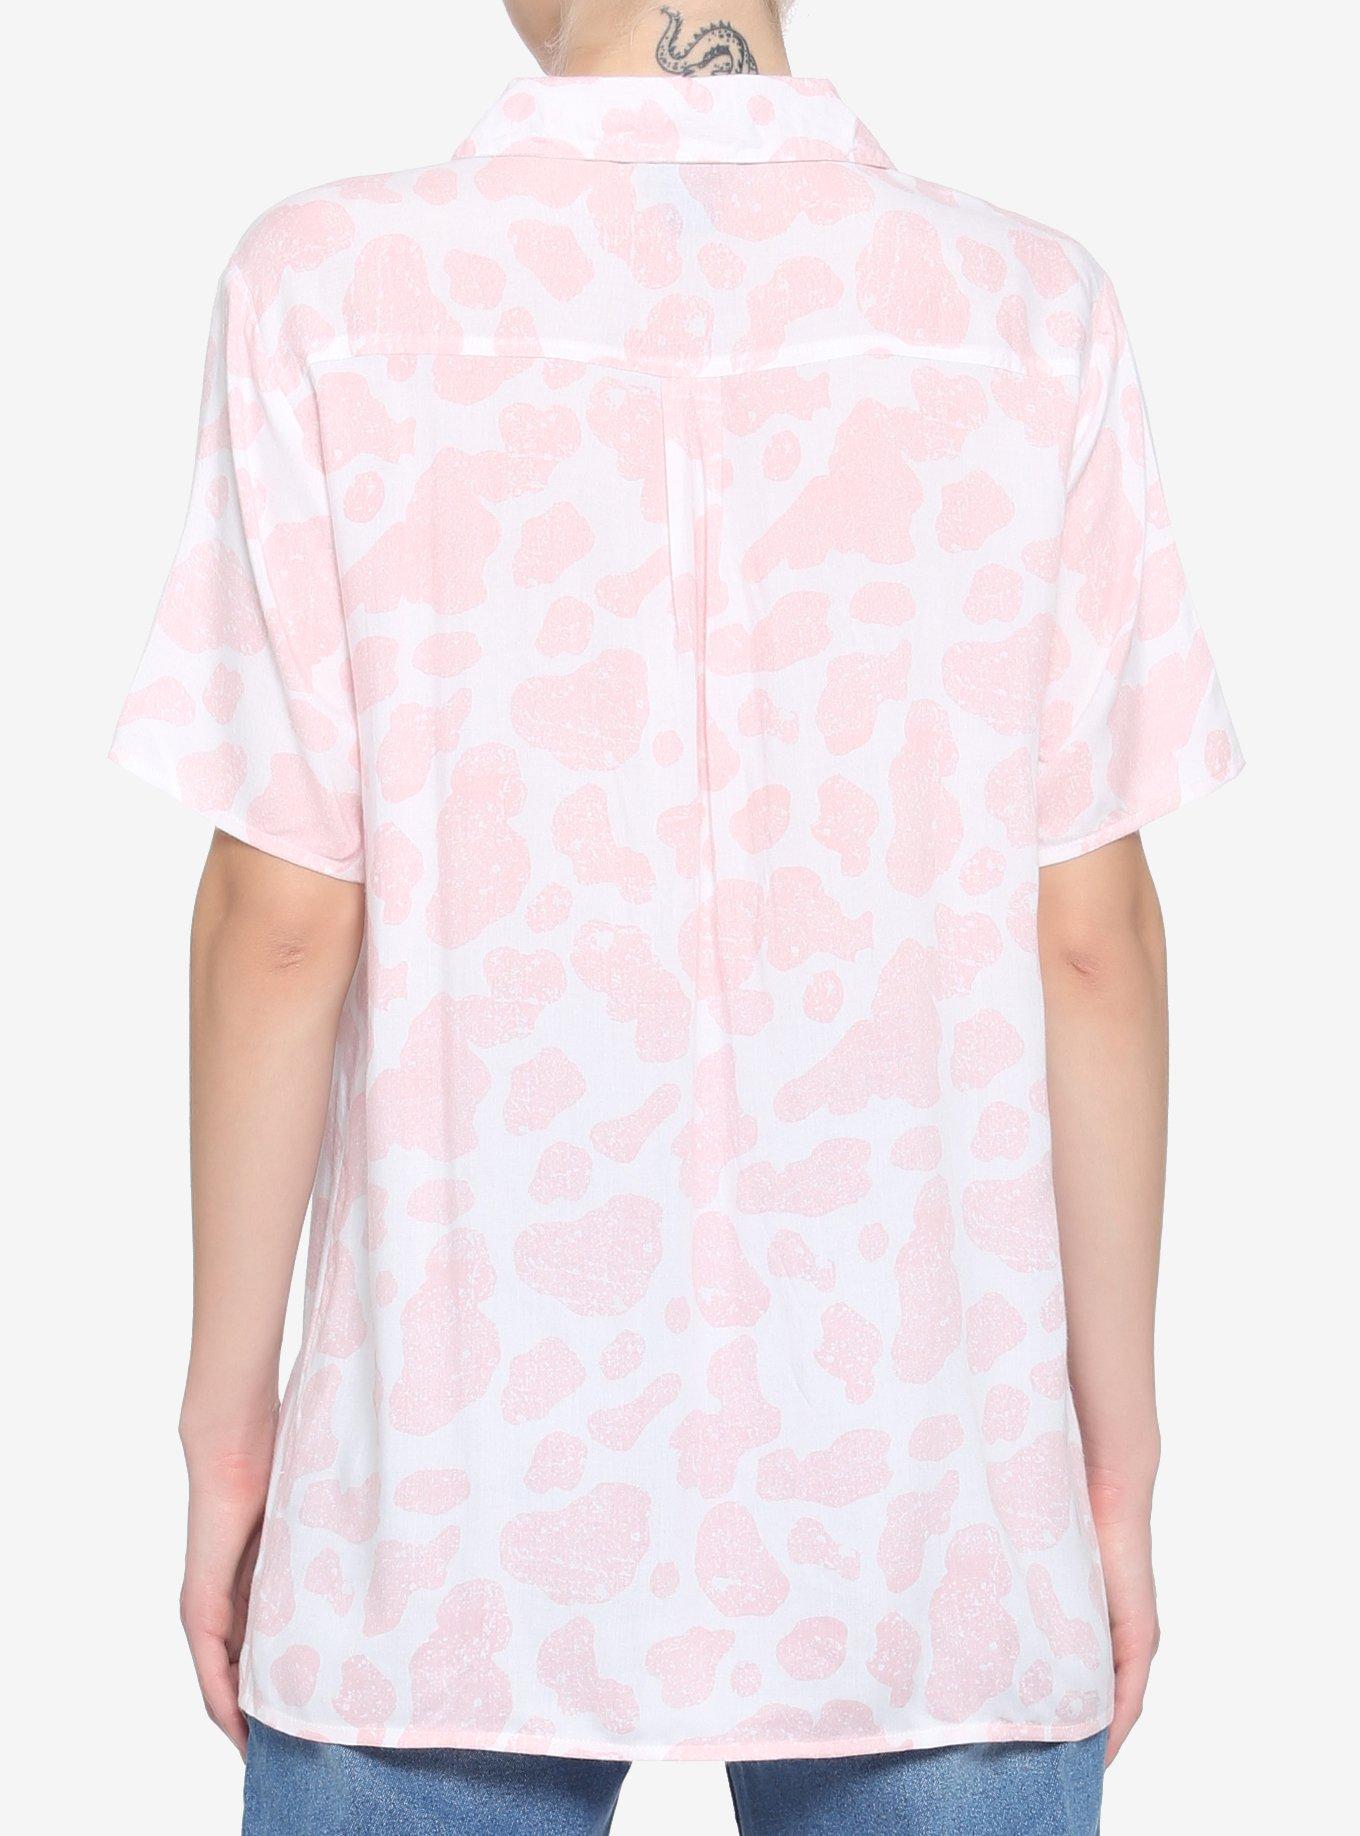 Strawberry Cow Girls Woven Button-Up, PINK, alternate